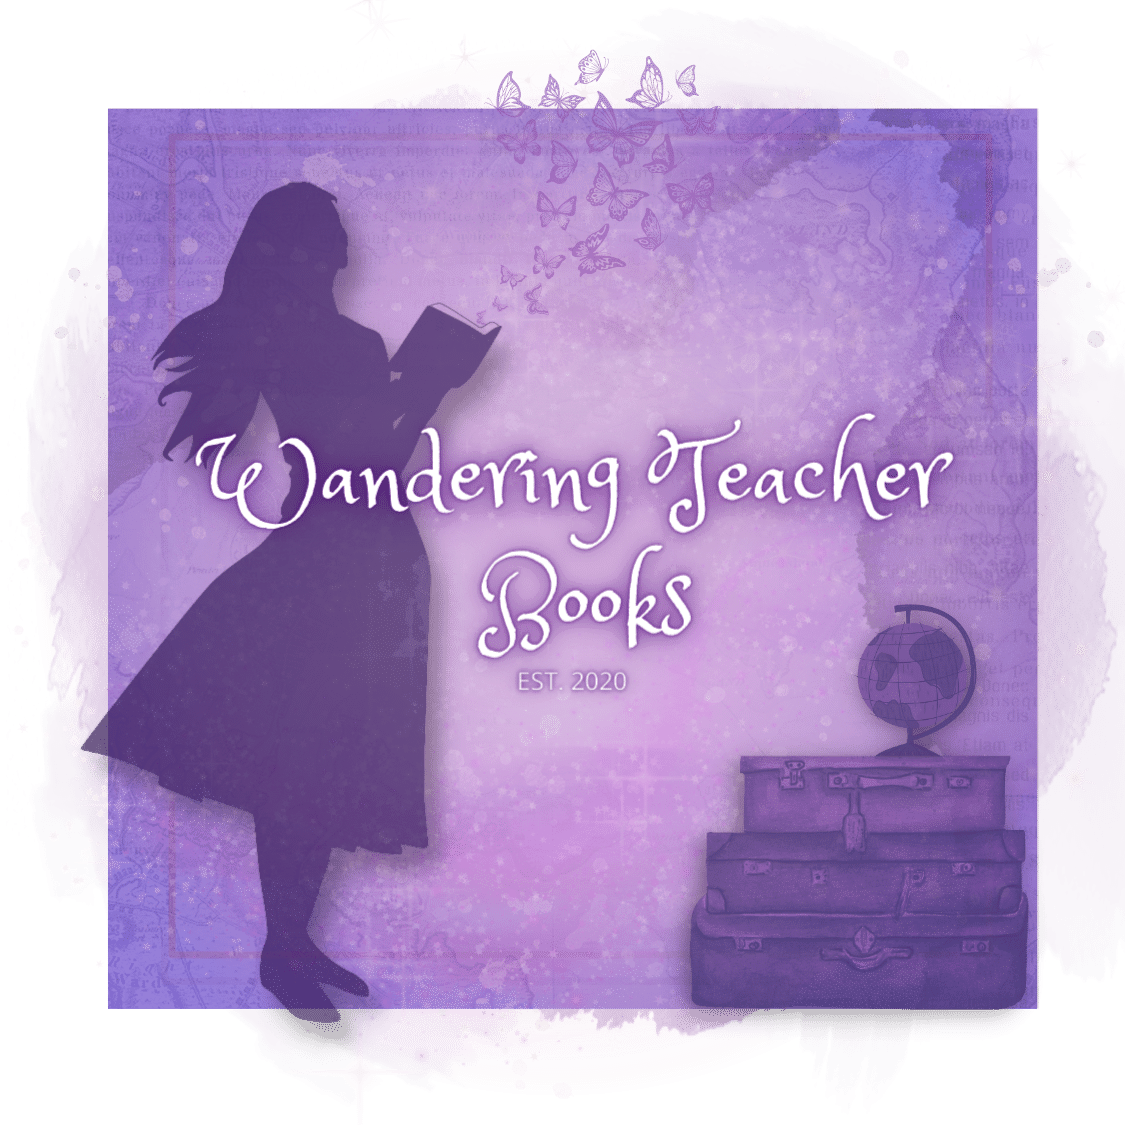 Wandering Teacher Books Logo - Julia Goldhirsh - Fantasy and Enchantment - New Adult and Young Adult Literature